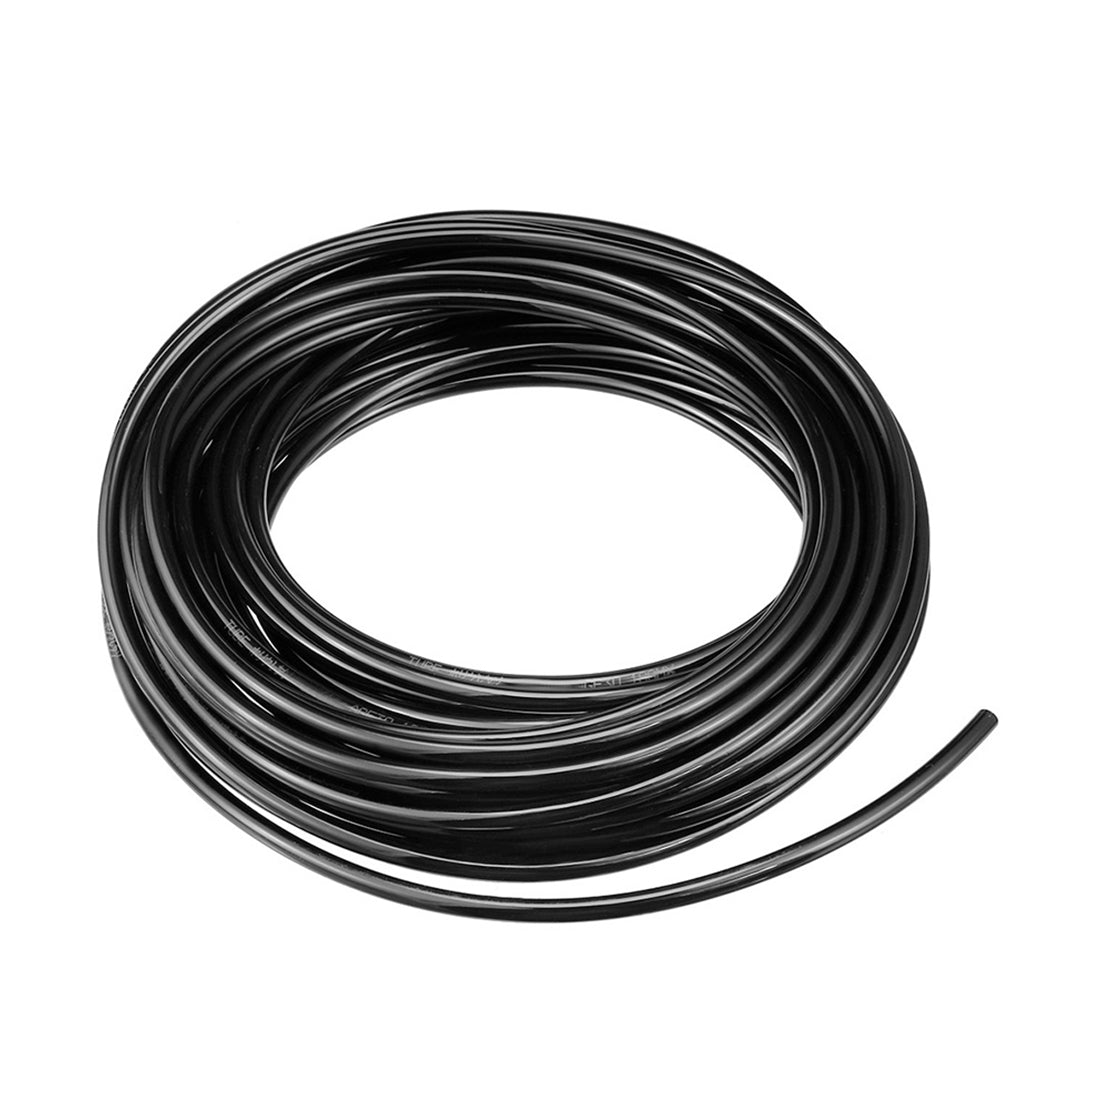 uxcell Uxcell 8mm X 5mm Pneumatic Air PU Hose Pipe Tube 10 Meter 32.8ft Black